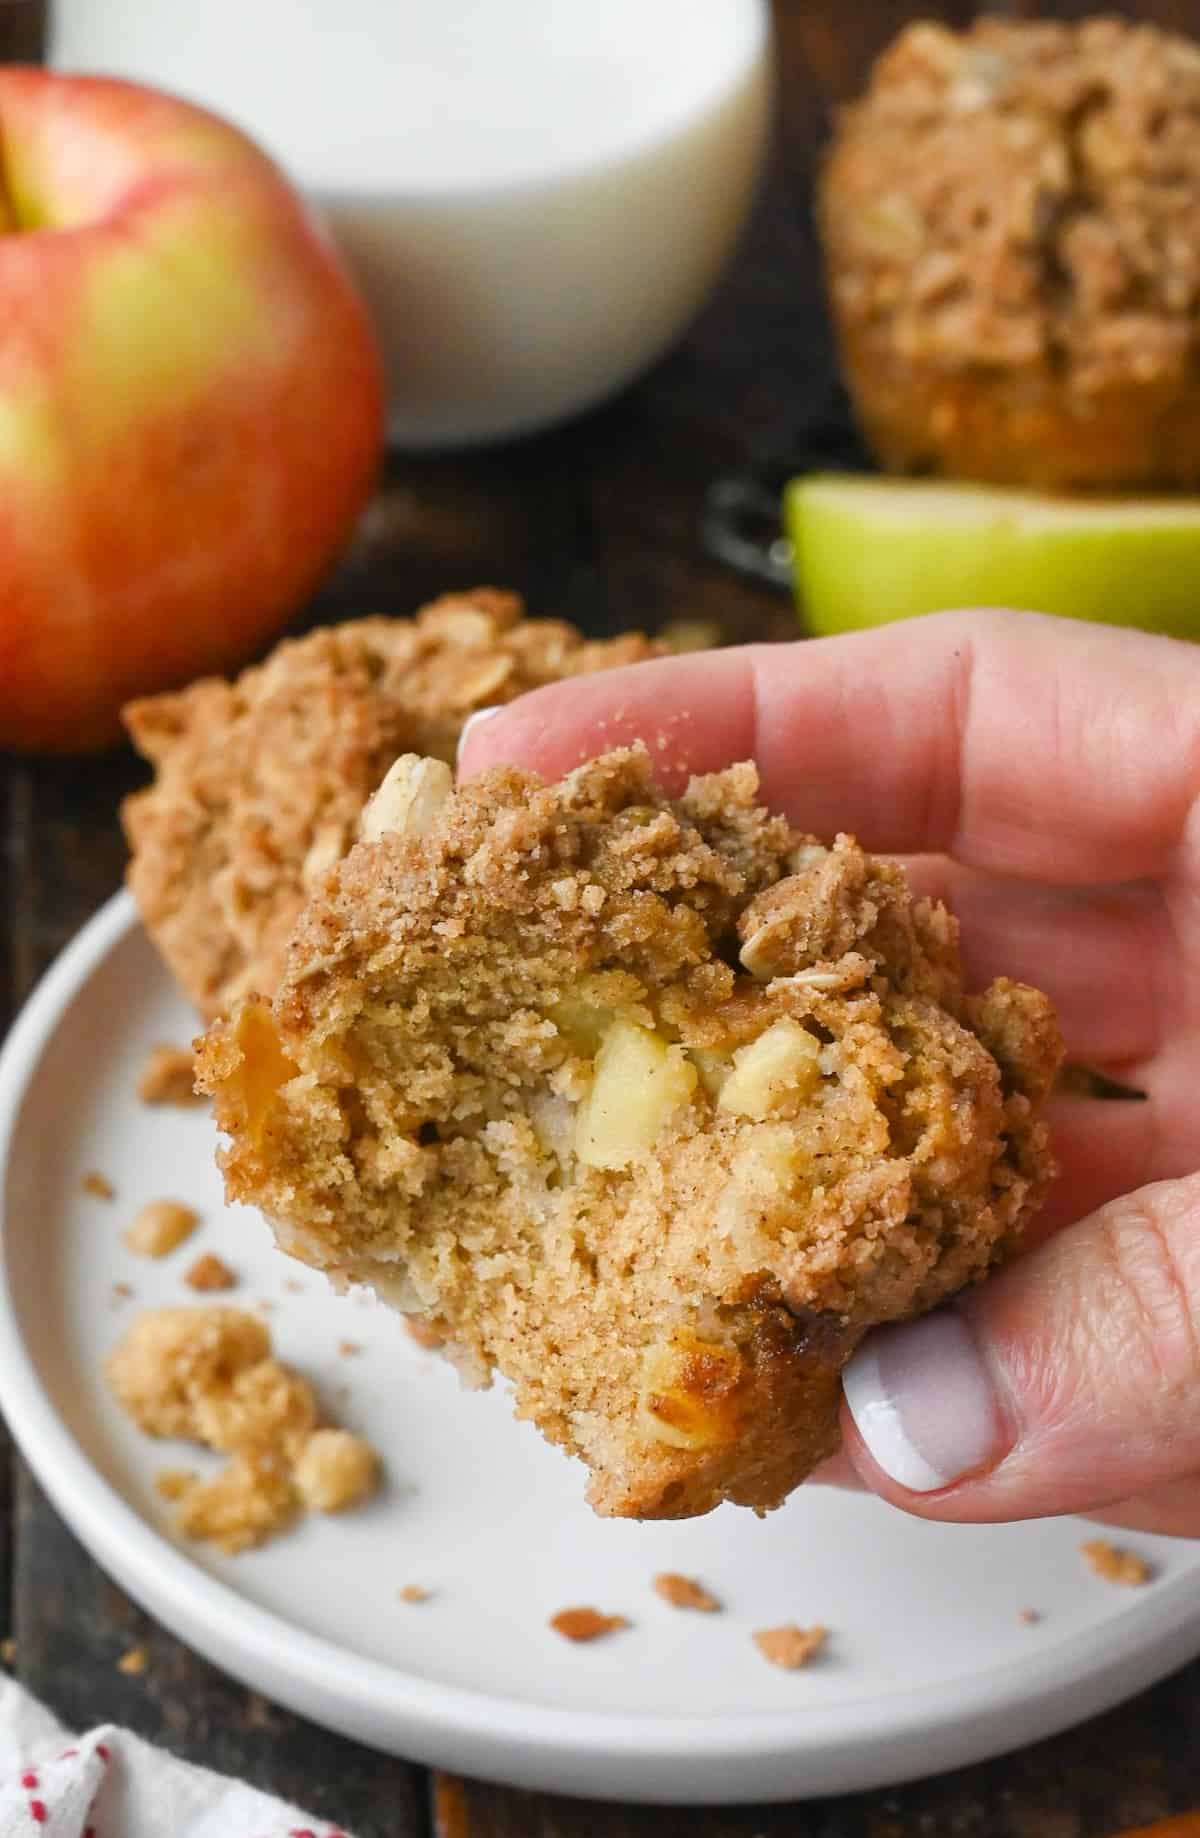 Apple spice muffin being held with a bite out of it.